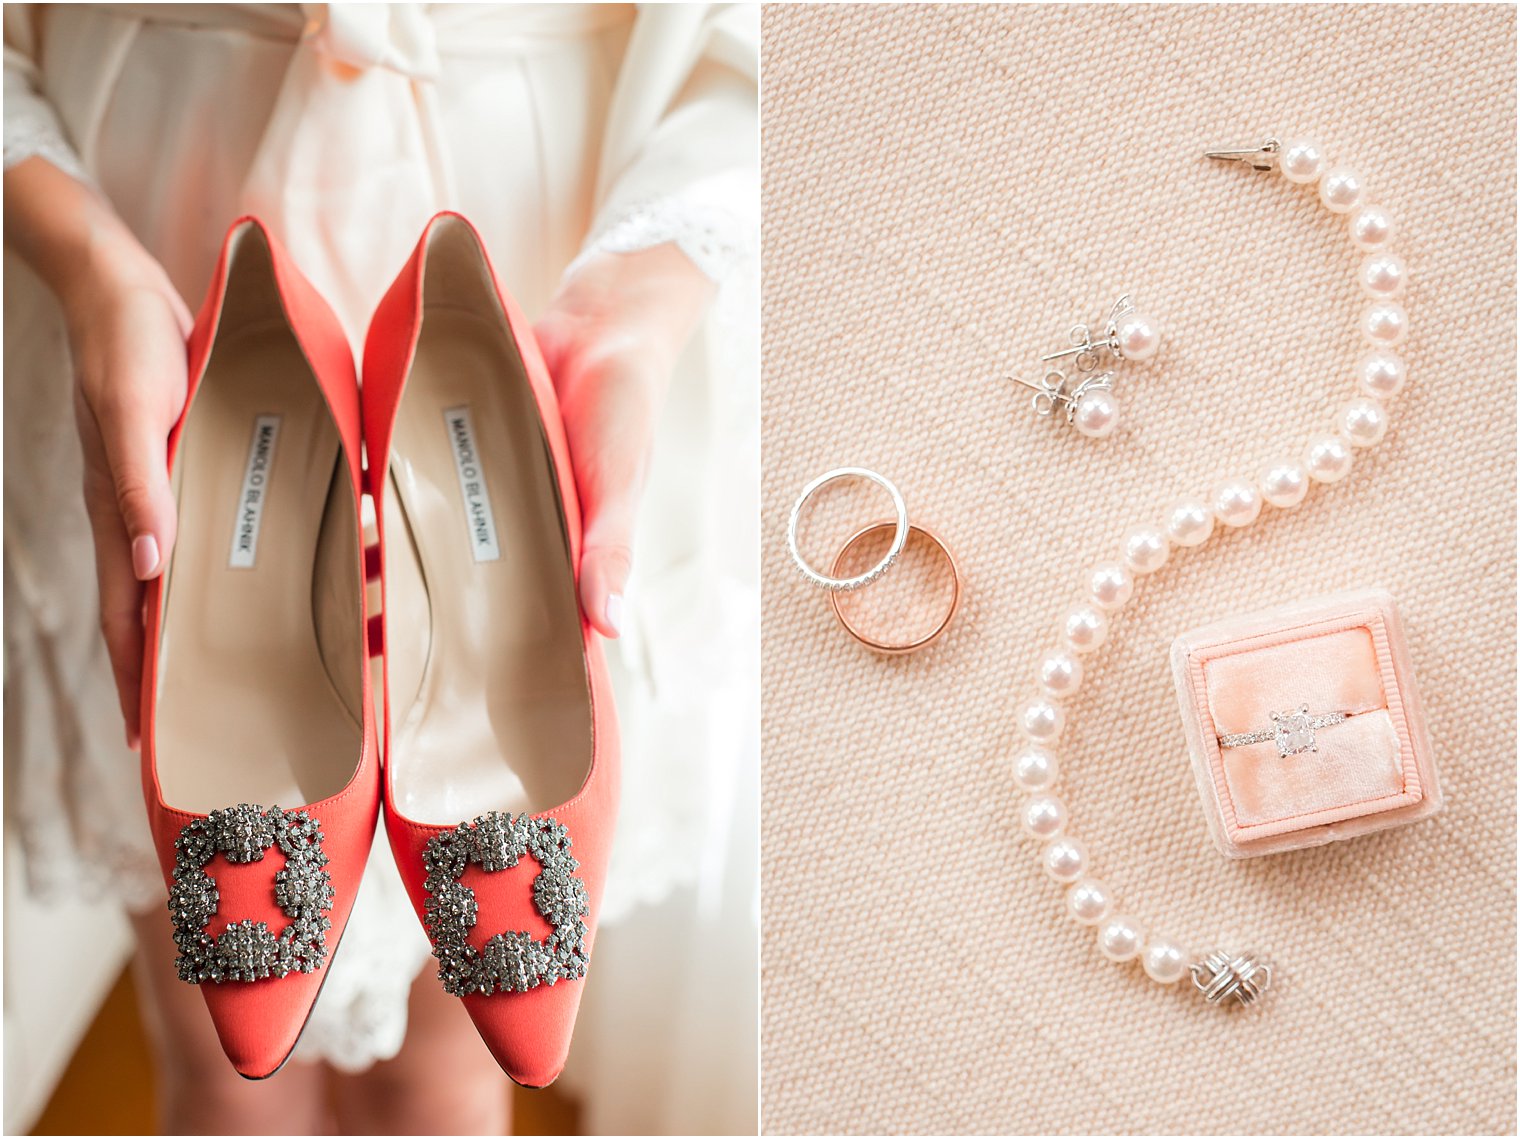 Manolo Blahnik shoes and Mrs. Box